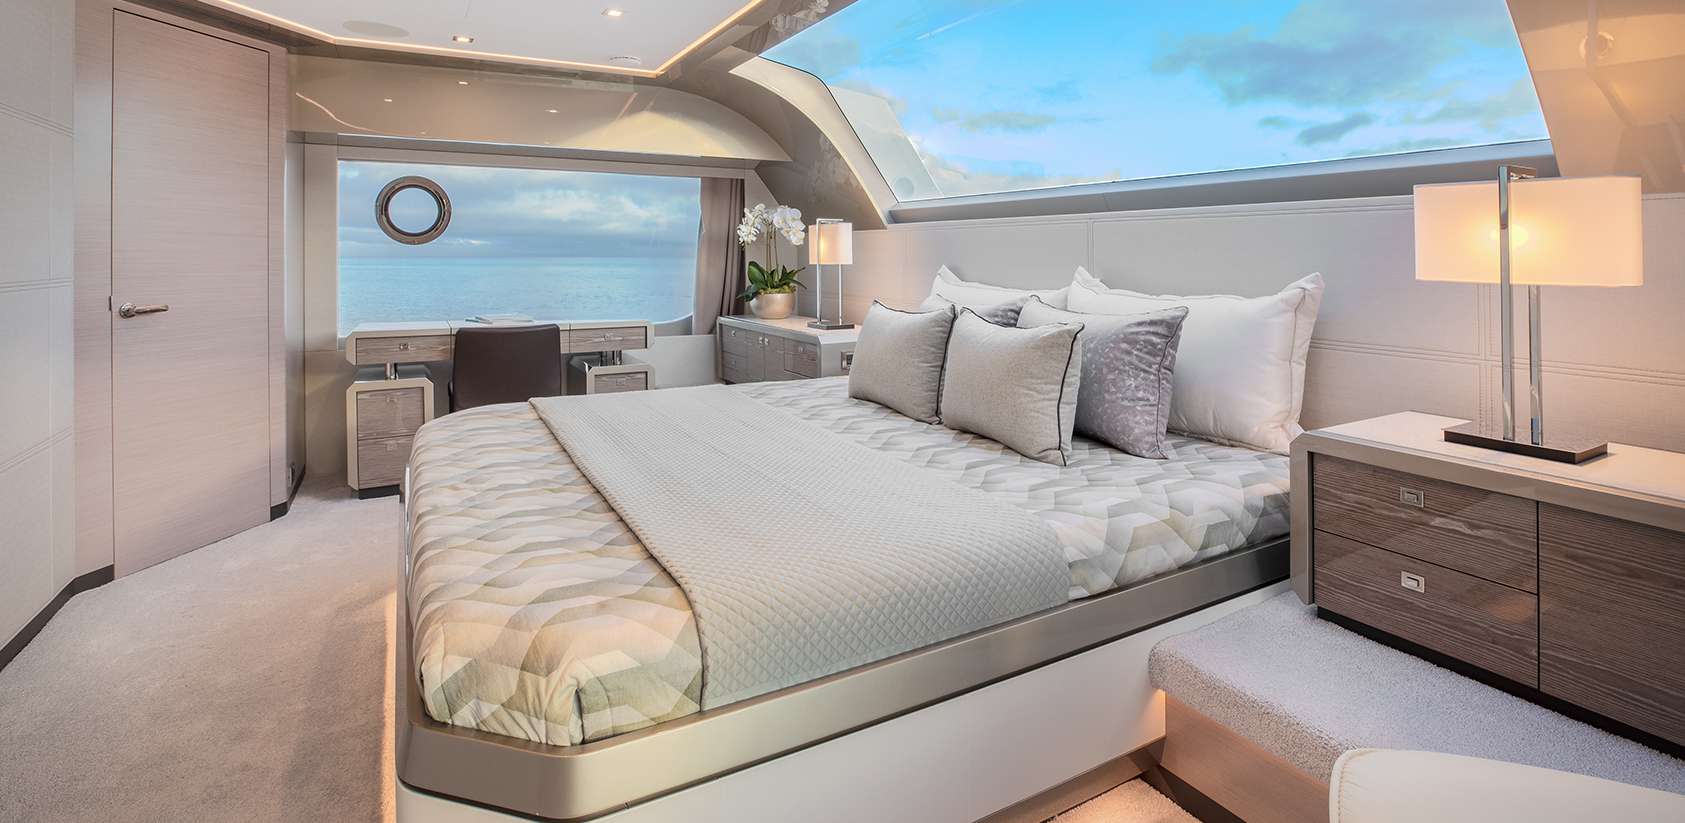 ALMOST DONE - Superyacht charter US Virgin Islands & Boat hire in Caribbean, Bahamas, Florida East Coast, Cuba, Dominican Republic, Turks and Caicos, USA South East 6